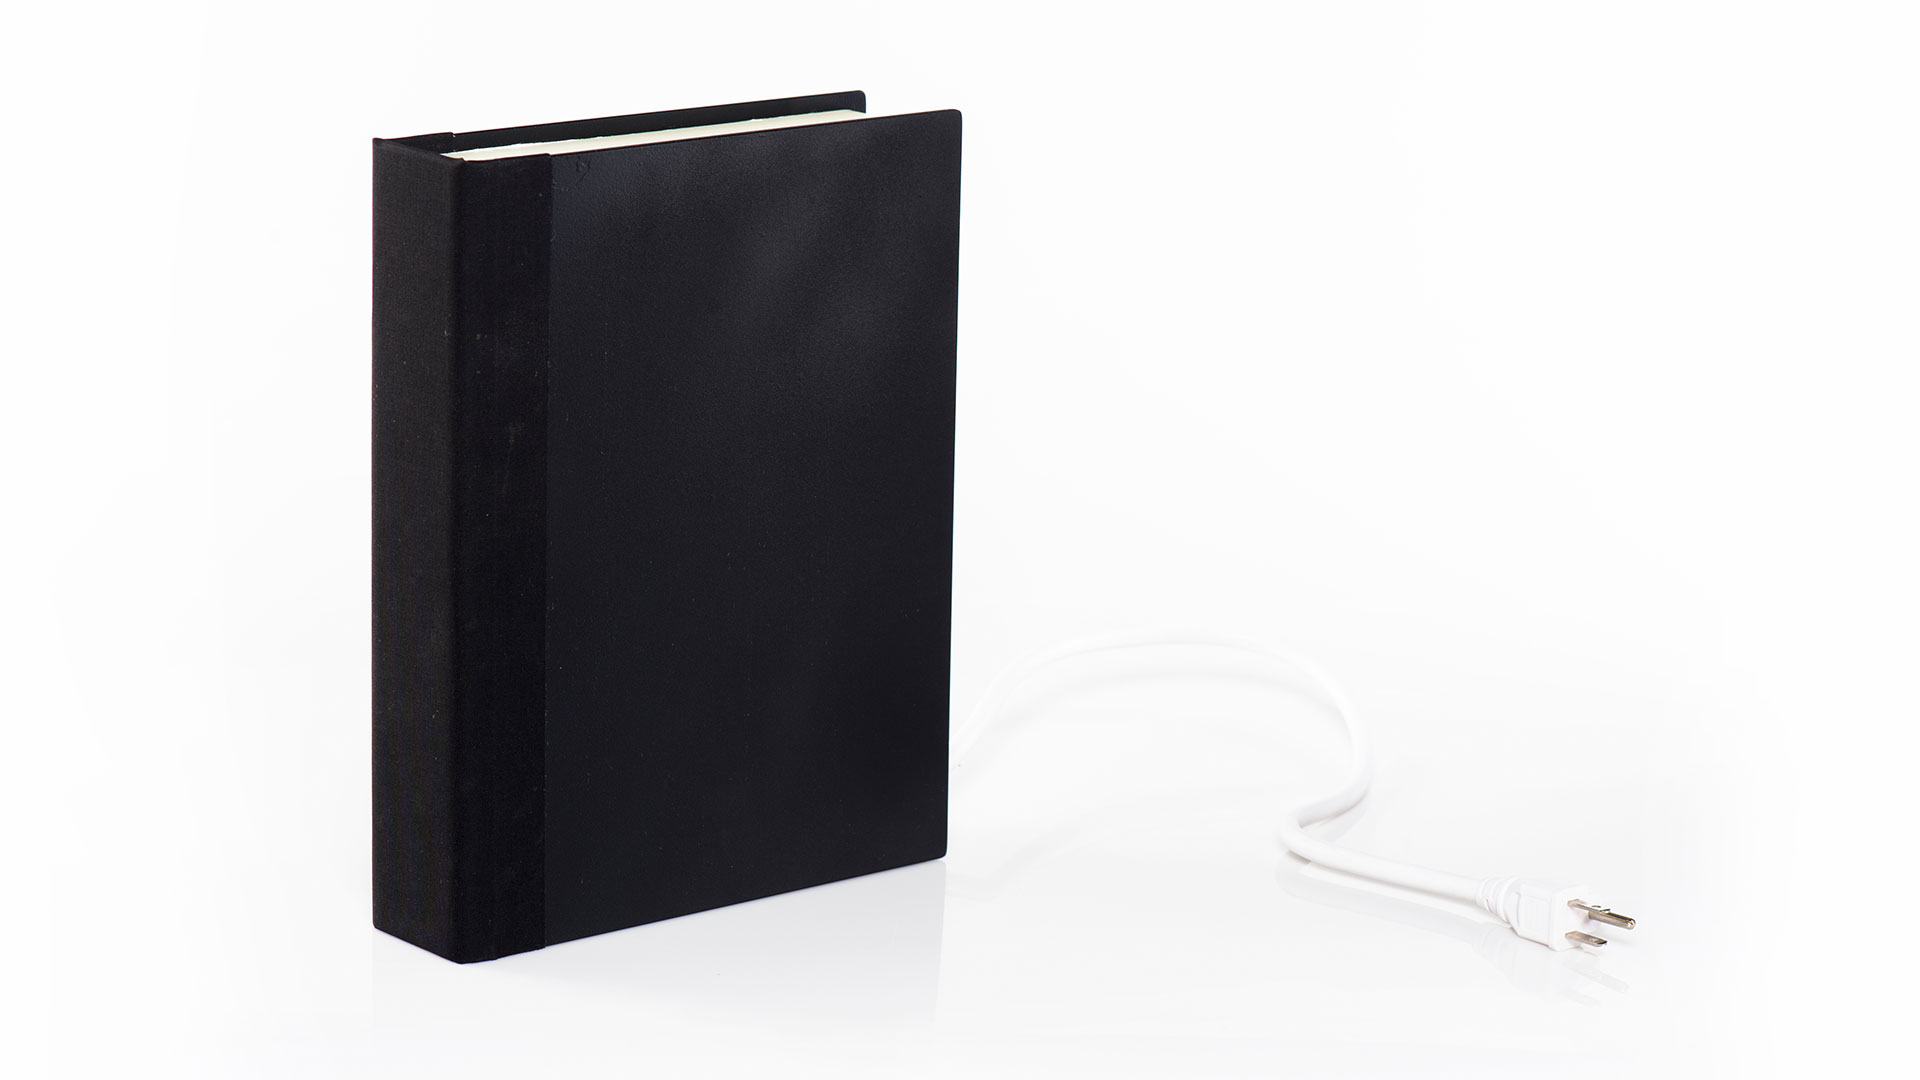 Closed black hardcover book standing with three prong power cord extended to the right